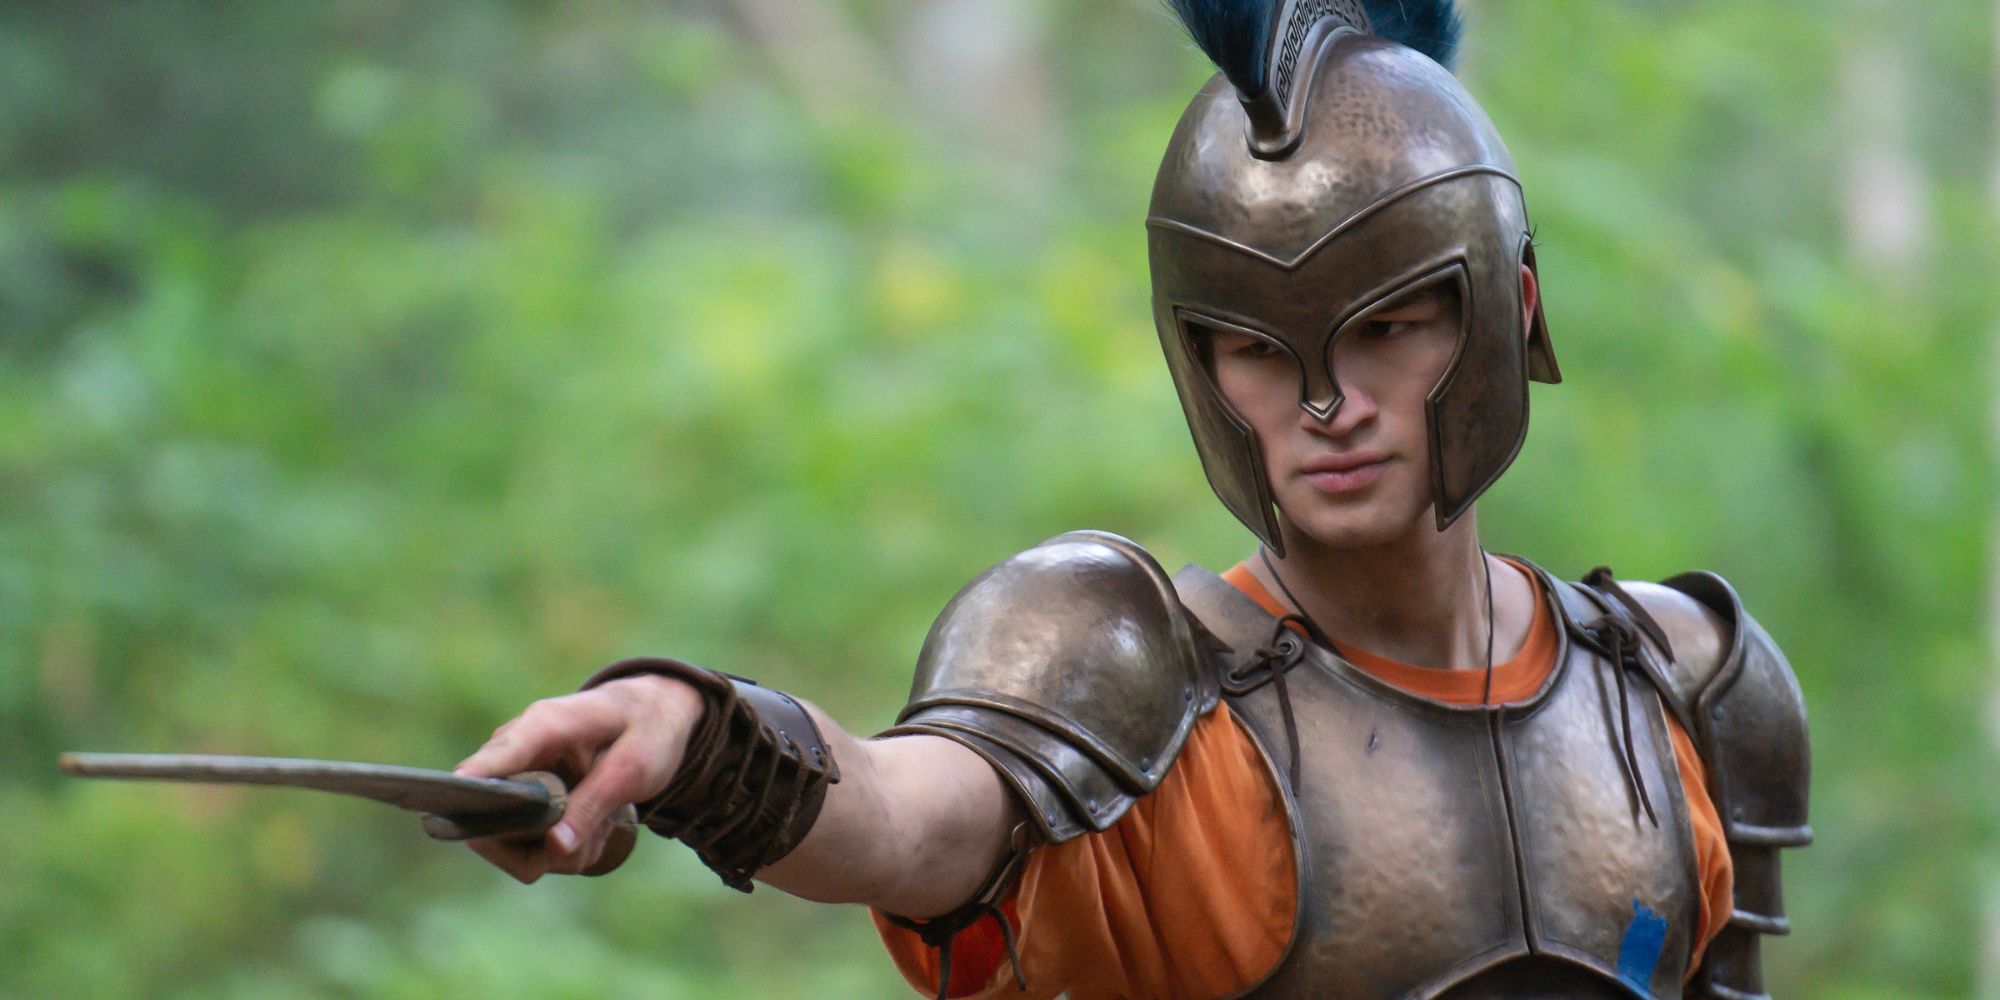 Charlie Bushnell as Luke wearing armor and holding a sword in Percy Jackson